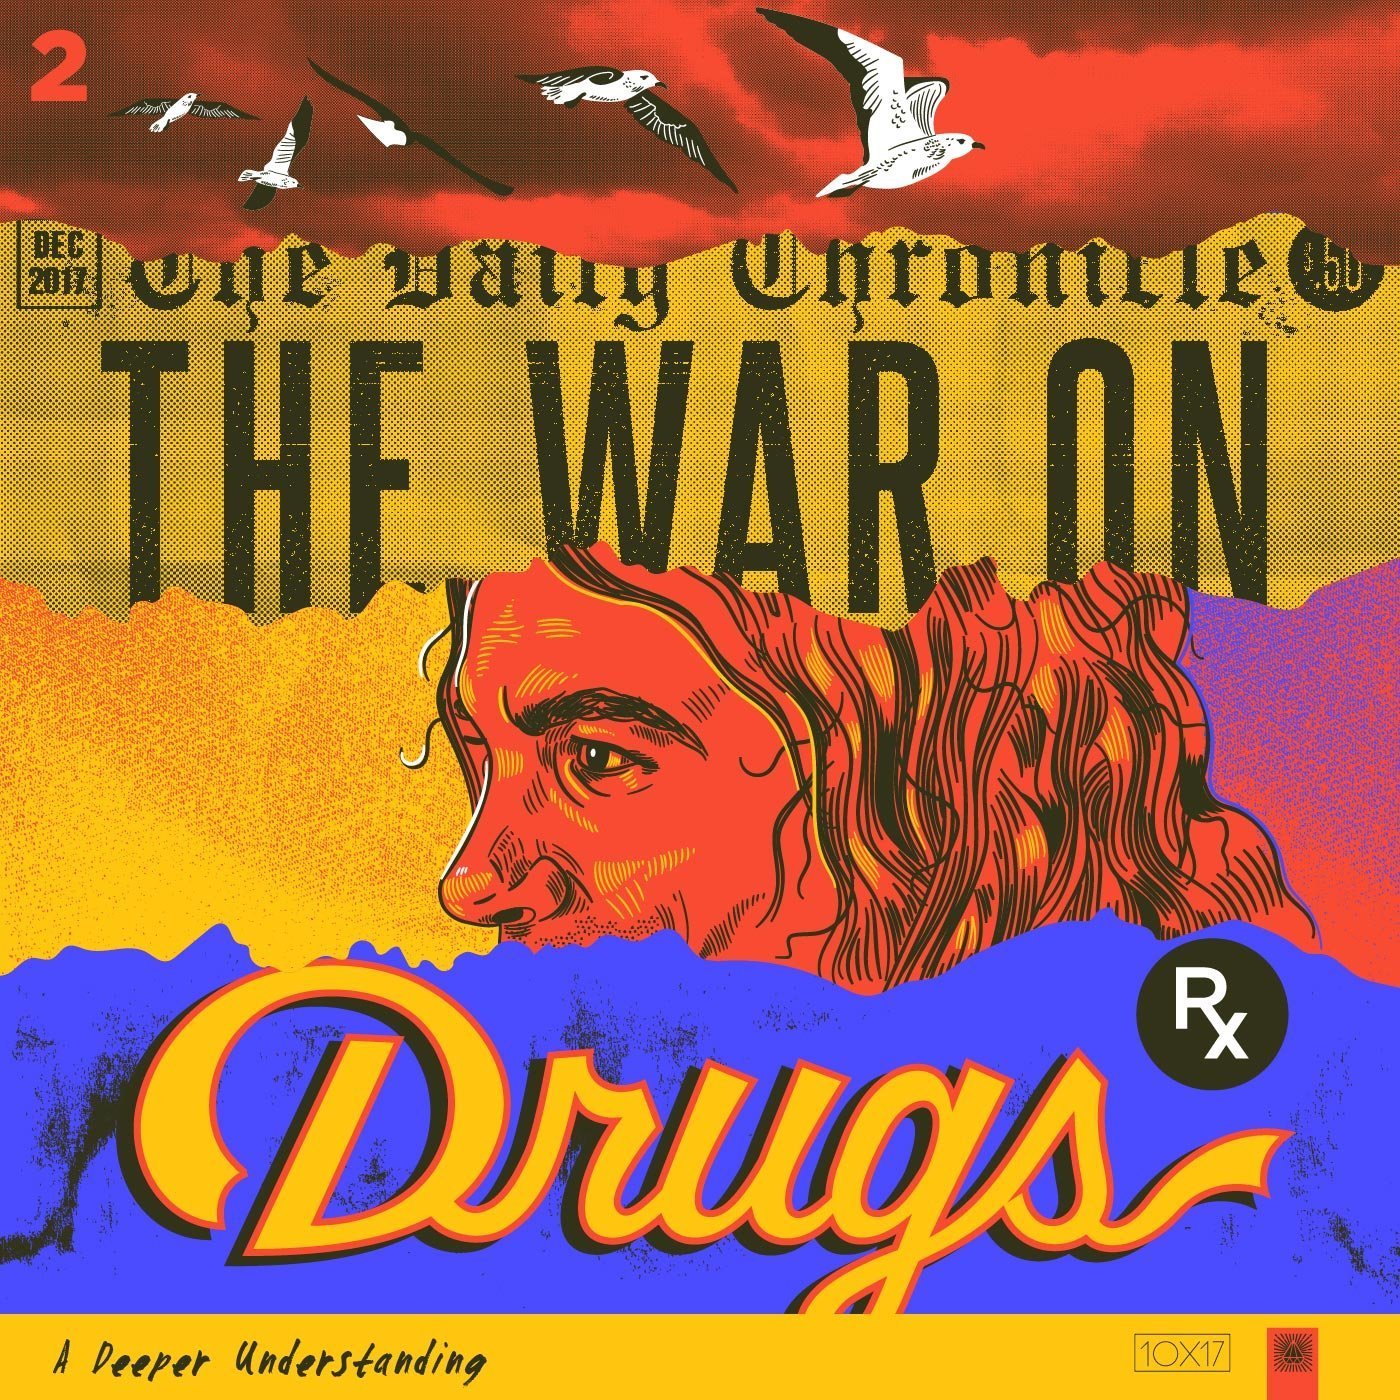 War on Drugs album cover reimagined by Amy Hood - Custom lettering and Adams face